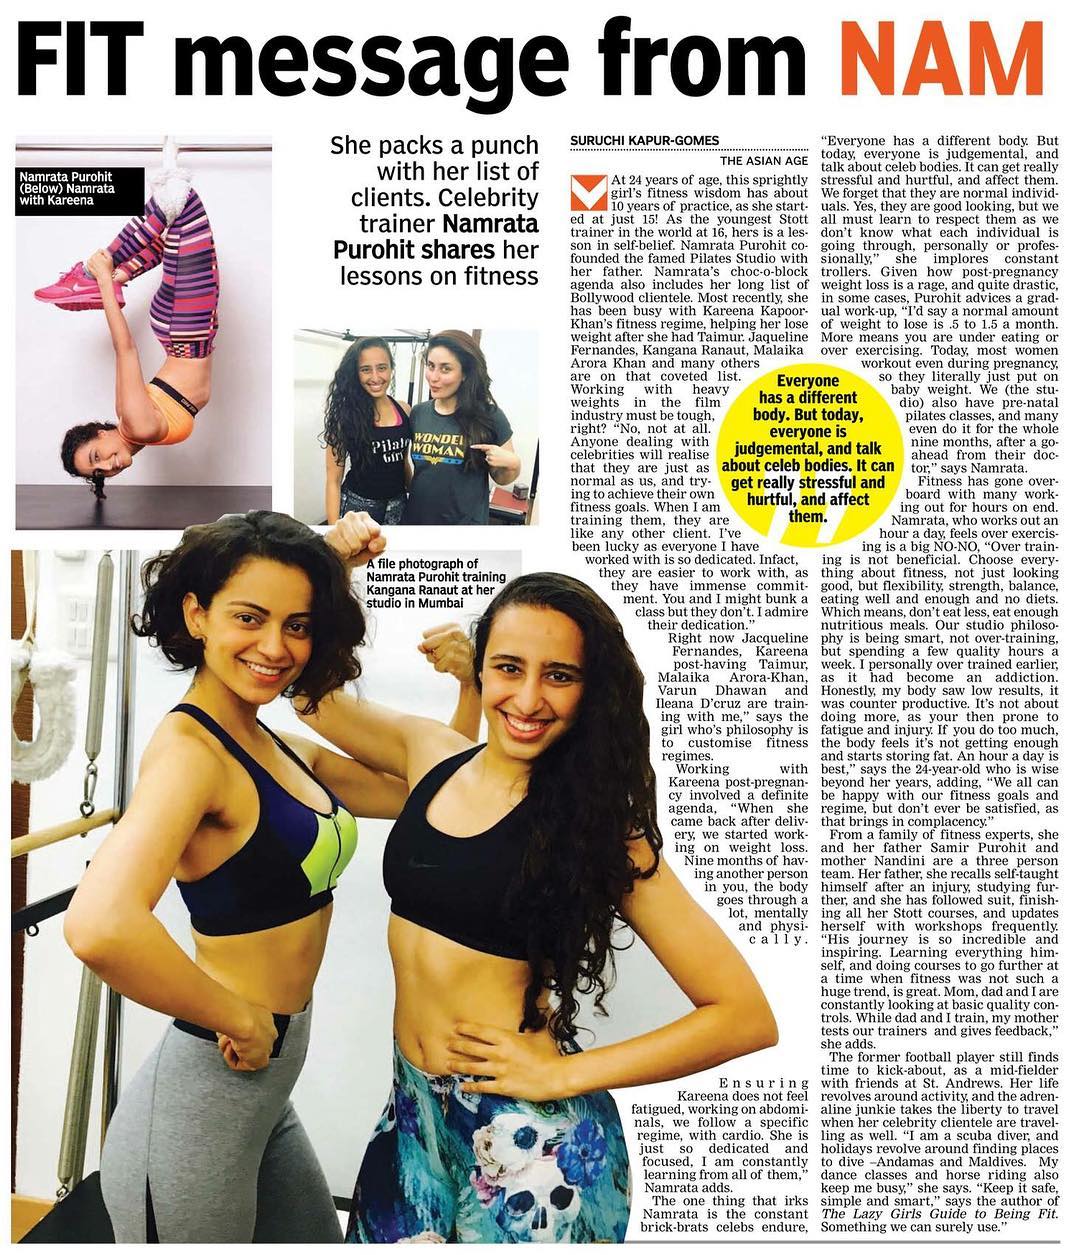 In @theasianage (Delhi Edition) today! 
A FIT message to all the Fitness Buffs from the #CelebrityFitnessTrainer - @namratapurohit herself on how to be Fit and Fab and to keep your fitness regime Safe Simple & Smart!.
.
.
.
#namratapurohit #fitnessguru #thepilatesstudio #pilates #fitnessbuffs #kareenakapoorkhan #kanganaranaut #bebo #malaikaarorakhan #varundhawan #jacquelinefernandes #celebrityfitnesstrainer #fitnesstrainer